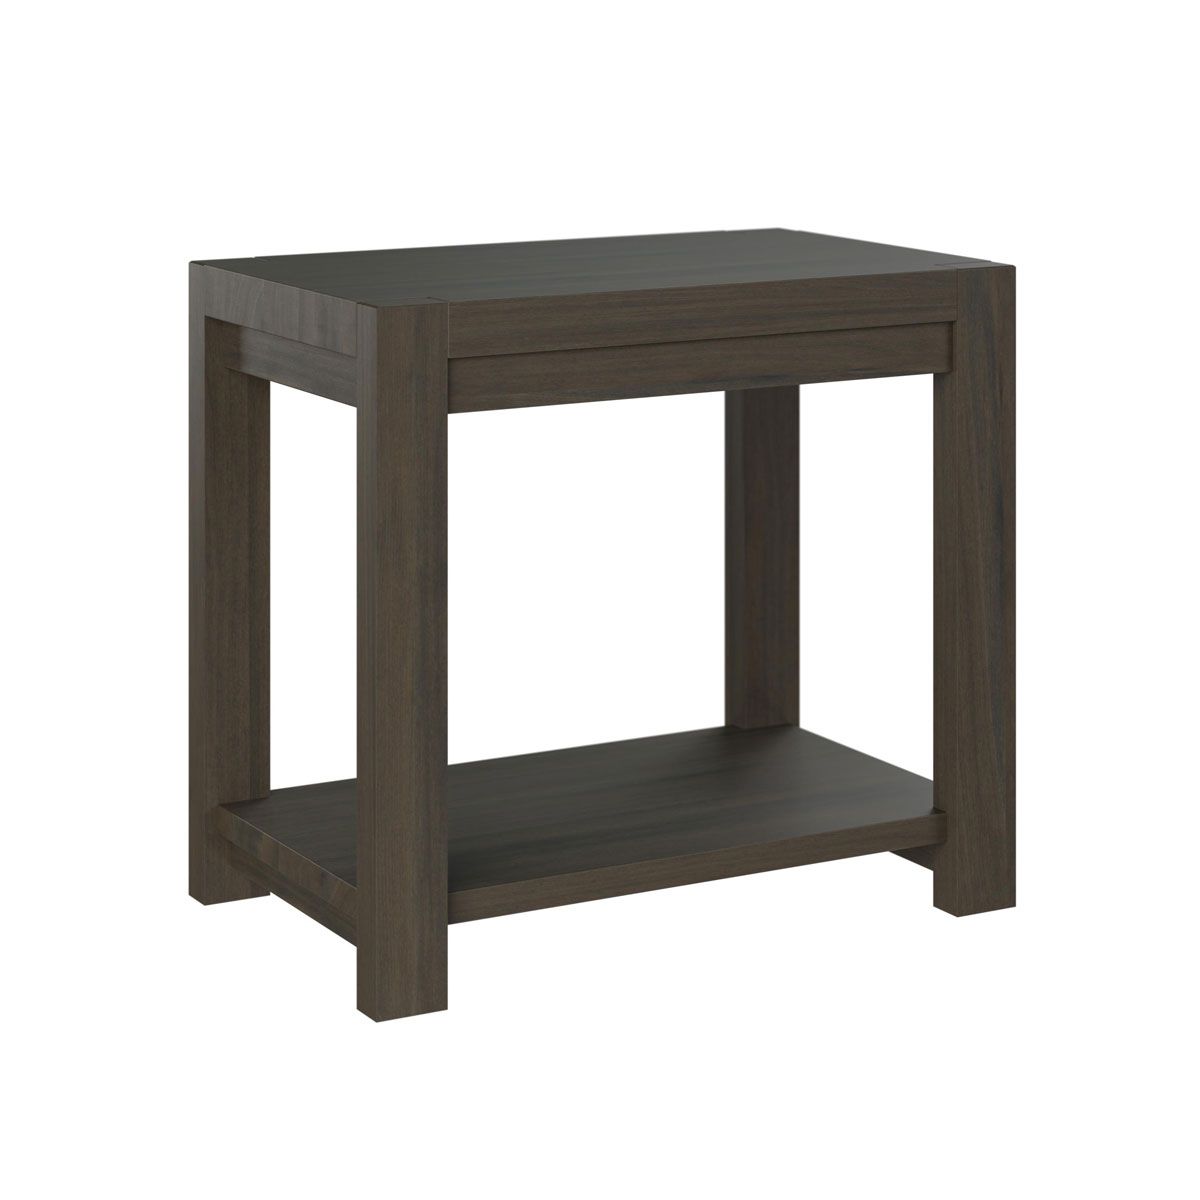 Brantbury Chairside Table shown in Brown Maple with OCS-118 Antique Slate finish.